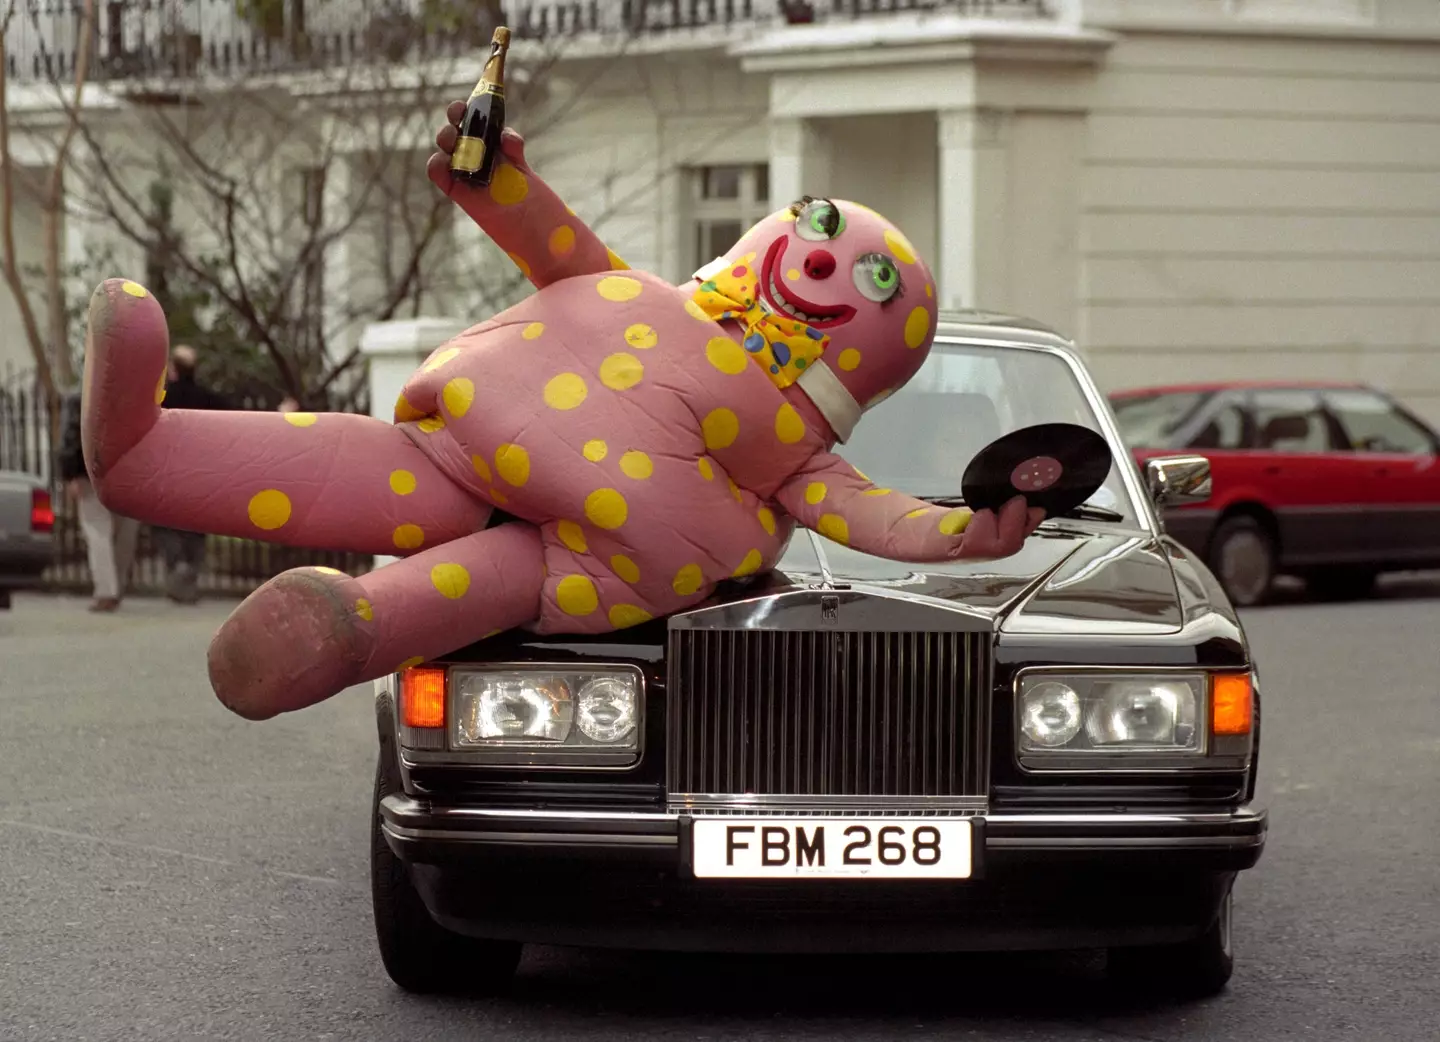 Mr Blobby carved a successful career for himself back in the 1990s and 2000s.